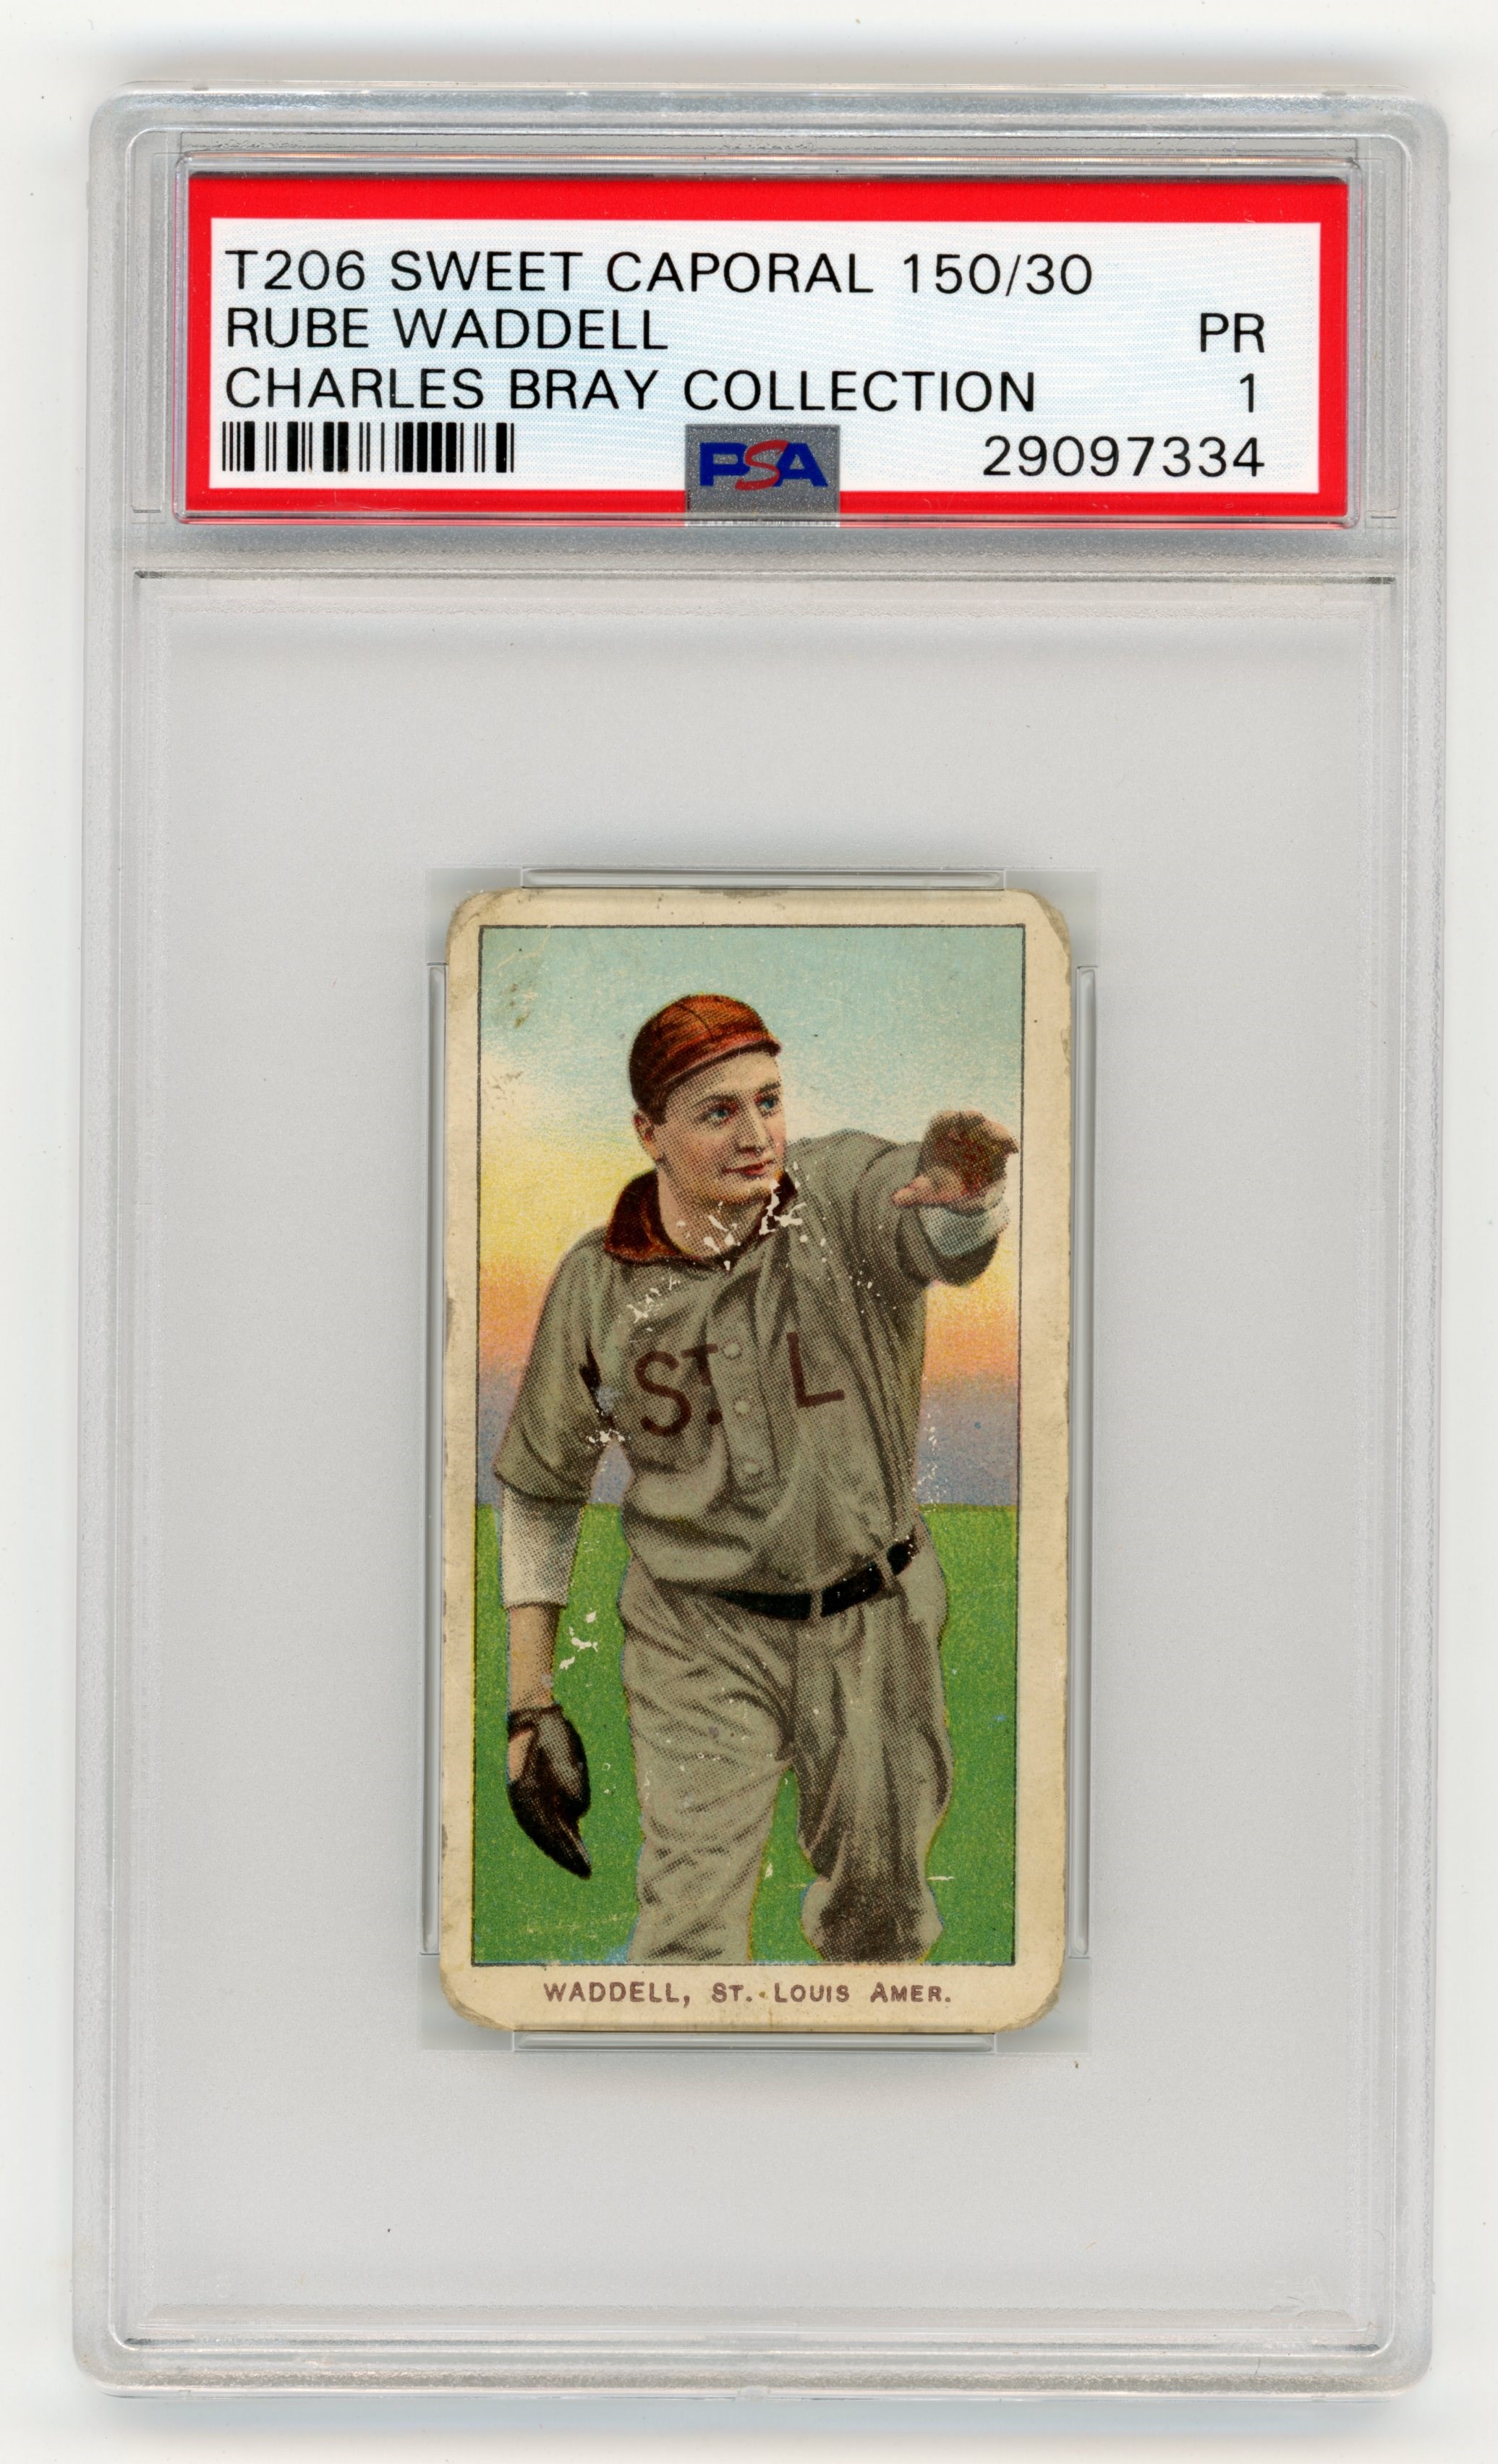 T206 Sweet Caporal 150/30 Rube Waddell PSA 1 From Charles Bray Collection